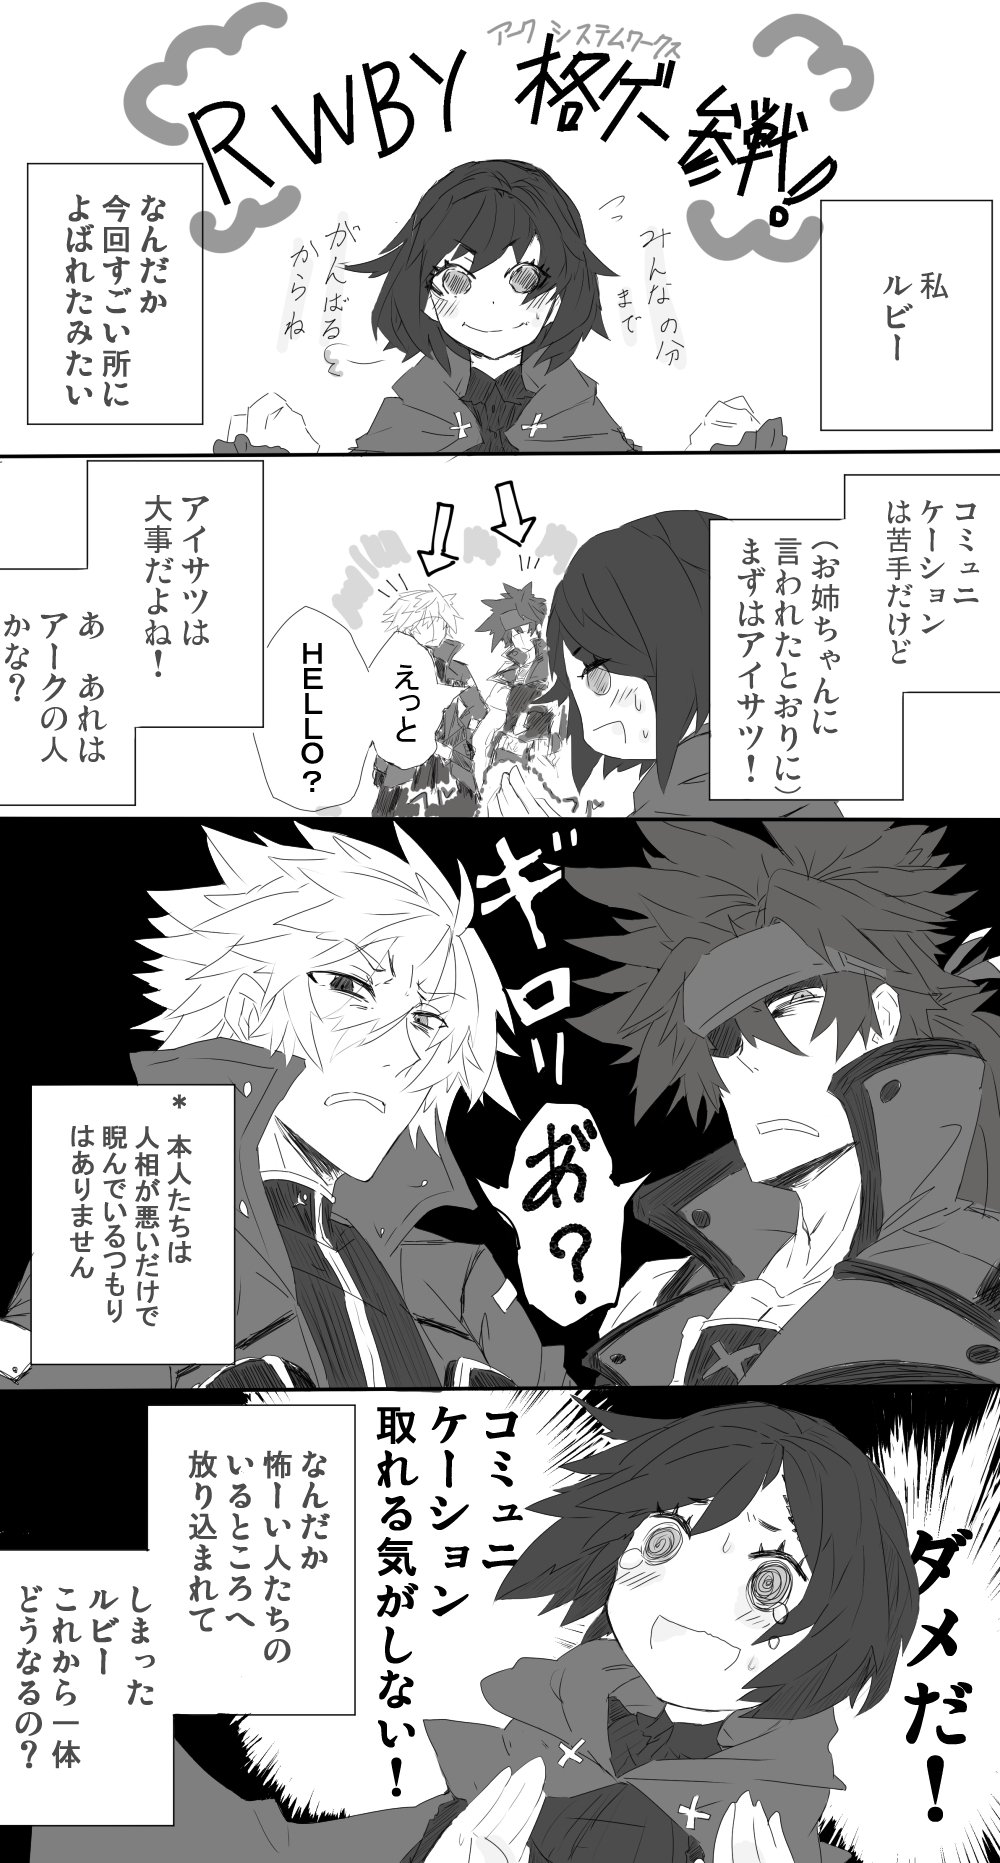 2boys blazblue blazblue:_cross_tag_battle cape guilty_gear guilty_gear_xrd headband highres long_hair looking_at_viewer monochrome multiple_boys open_mouth ponytail ragna_the_bloodedge ruby_rose rwby scared short_hair sol_badguy translation_request